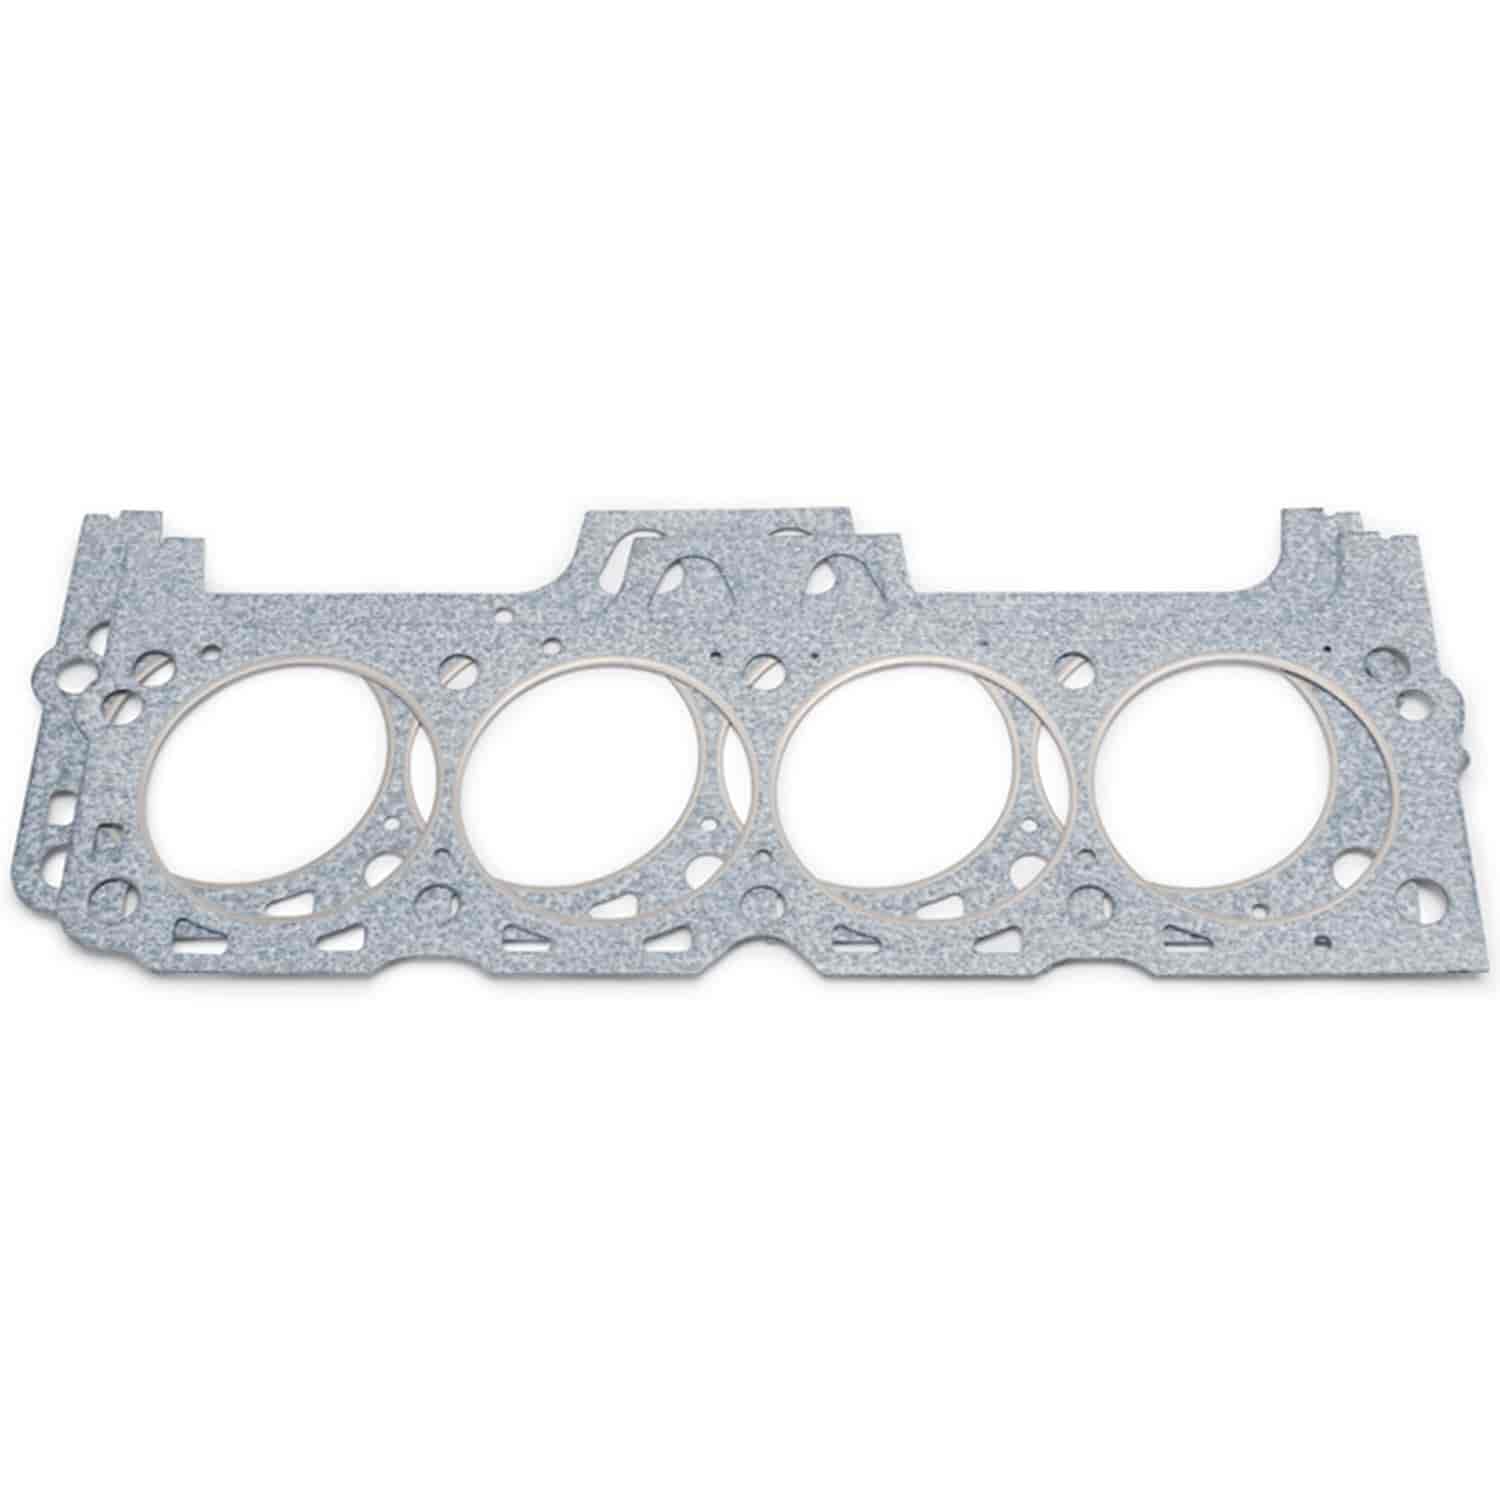 Head Gaskets for Big Block Ford 429-460